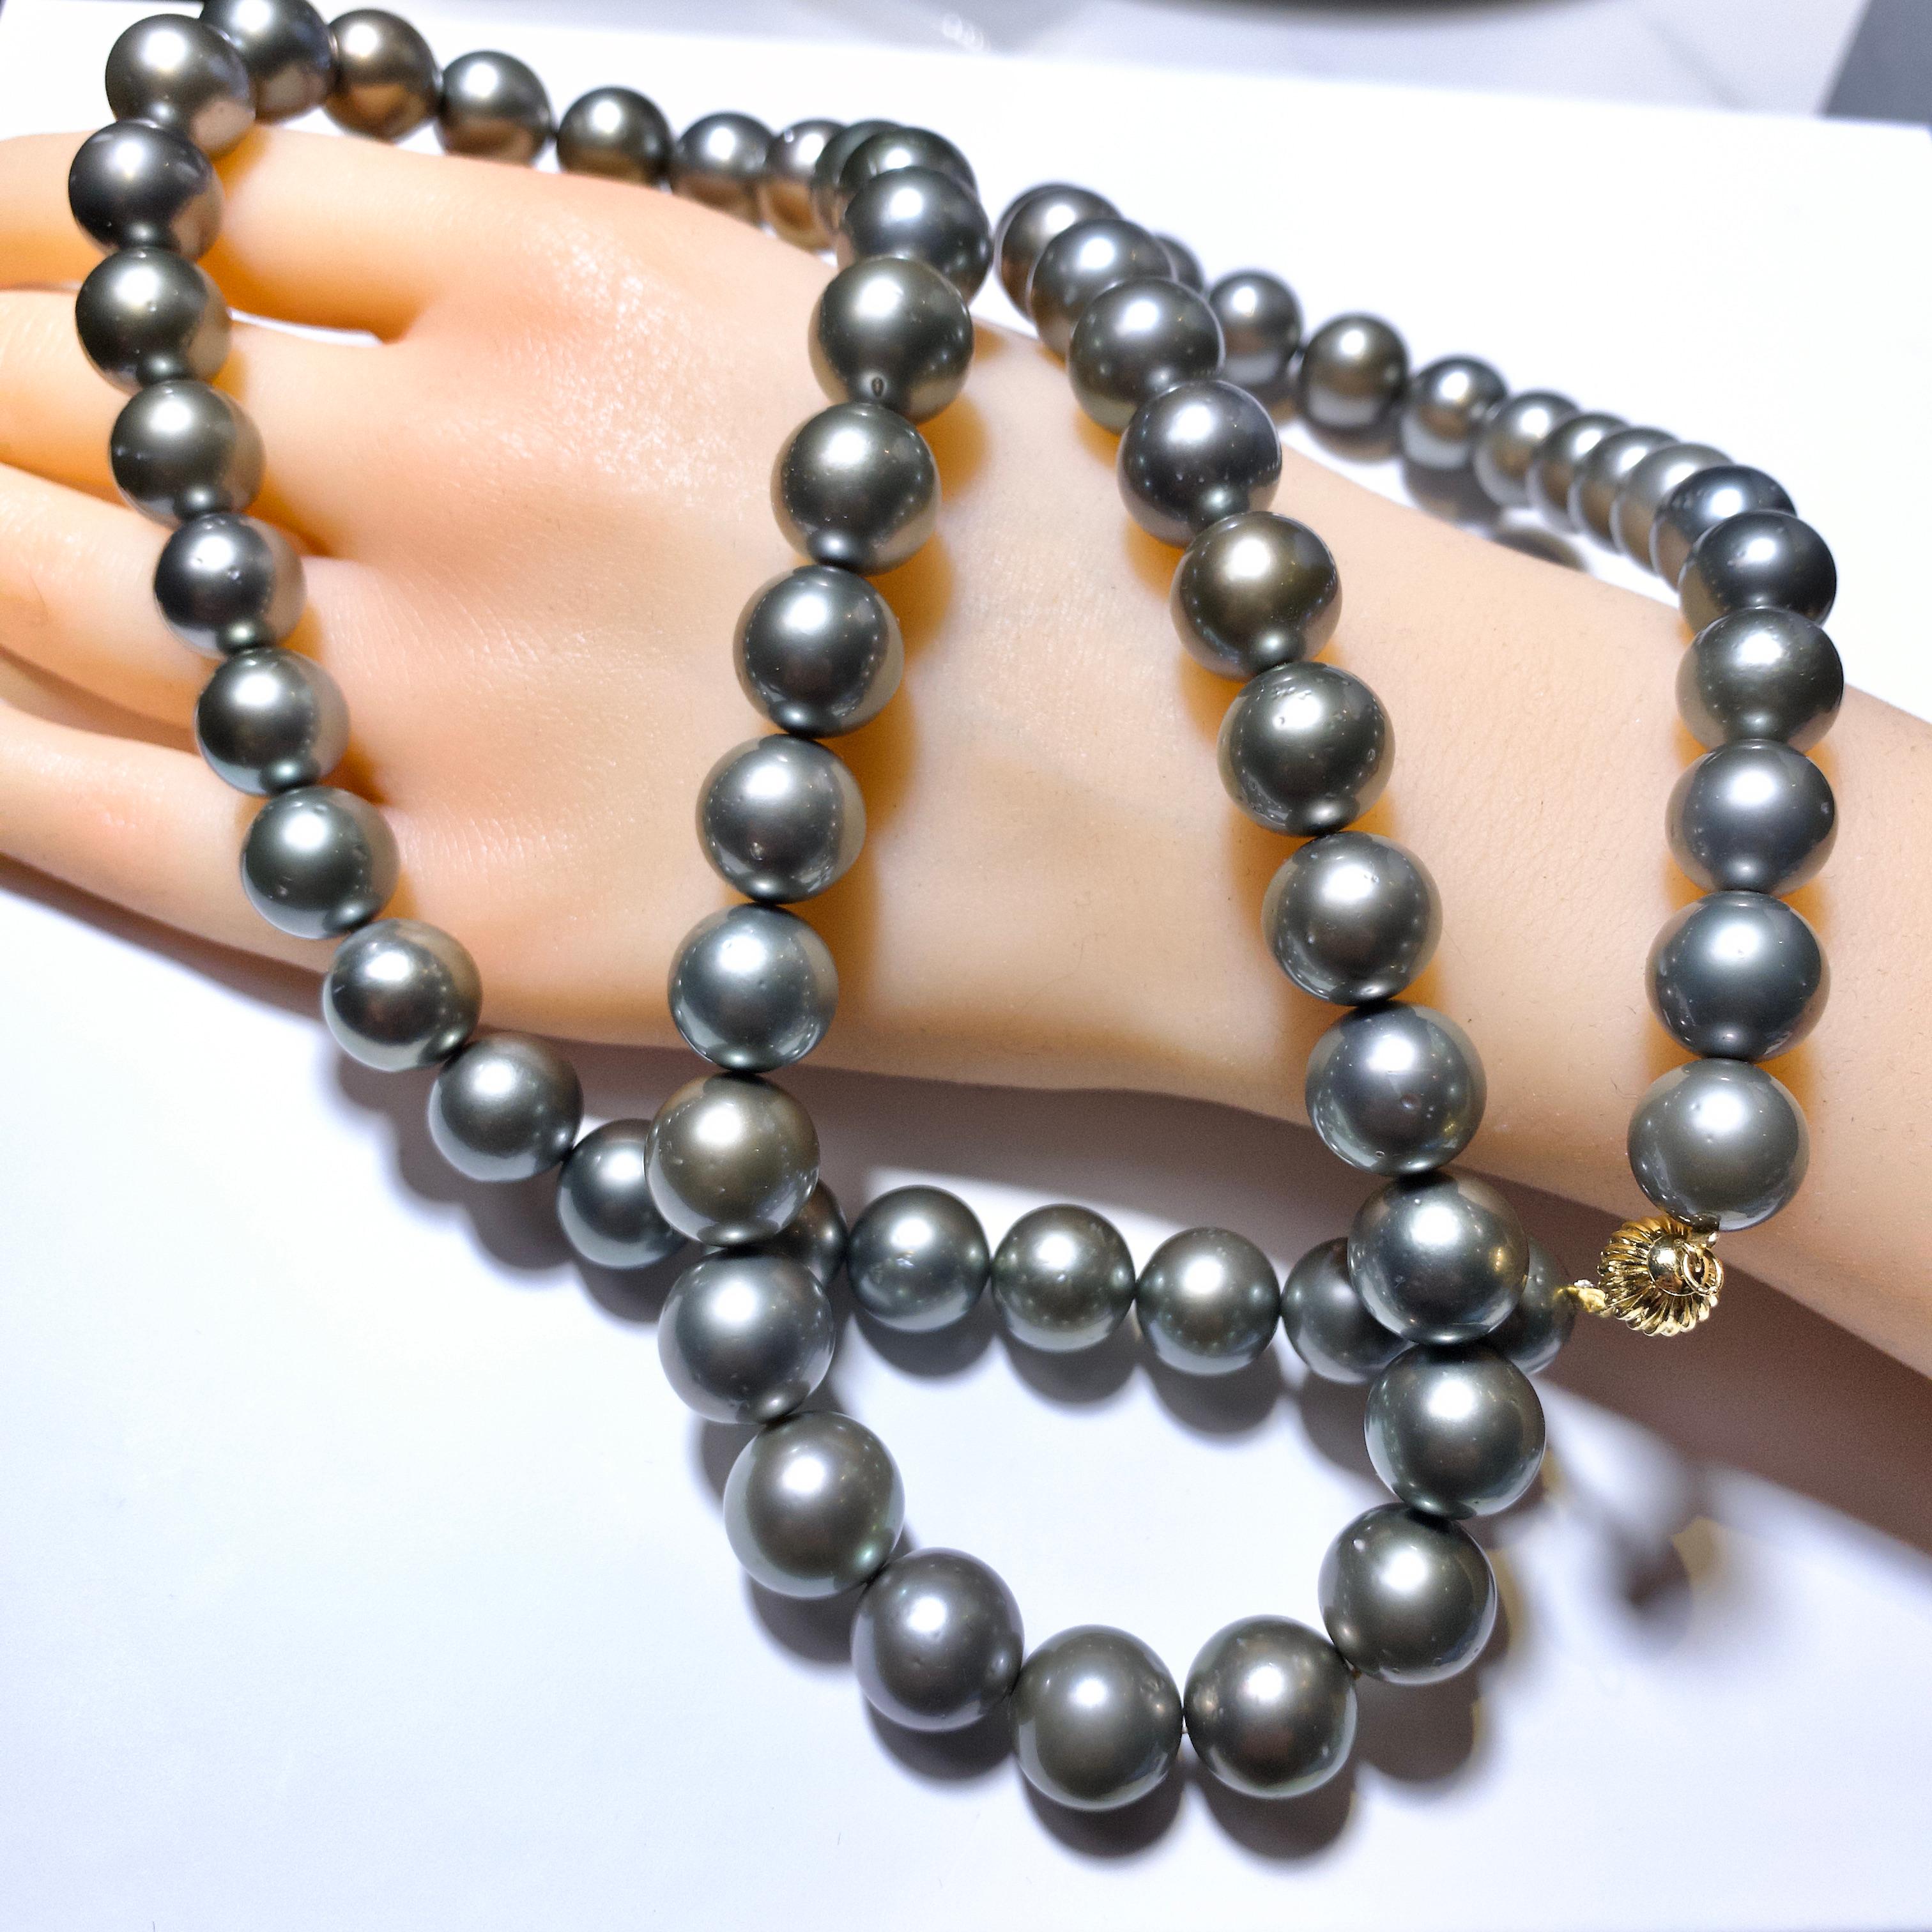 Bead Grey Colour Silver Tone Tahitian Pearl Necklace with 18k Gold Clasp For Sale